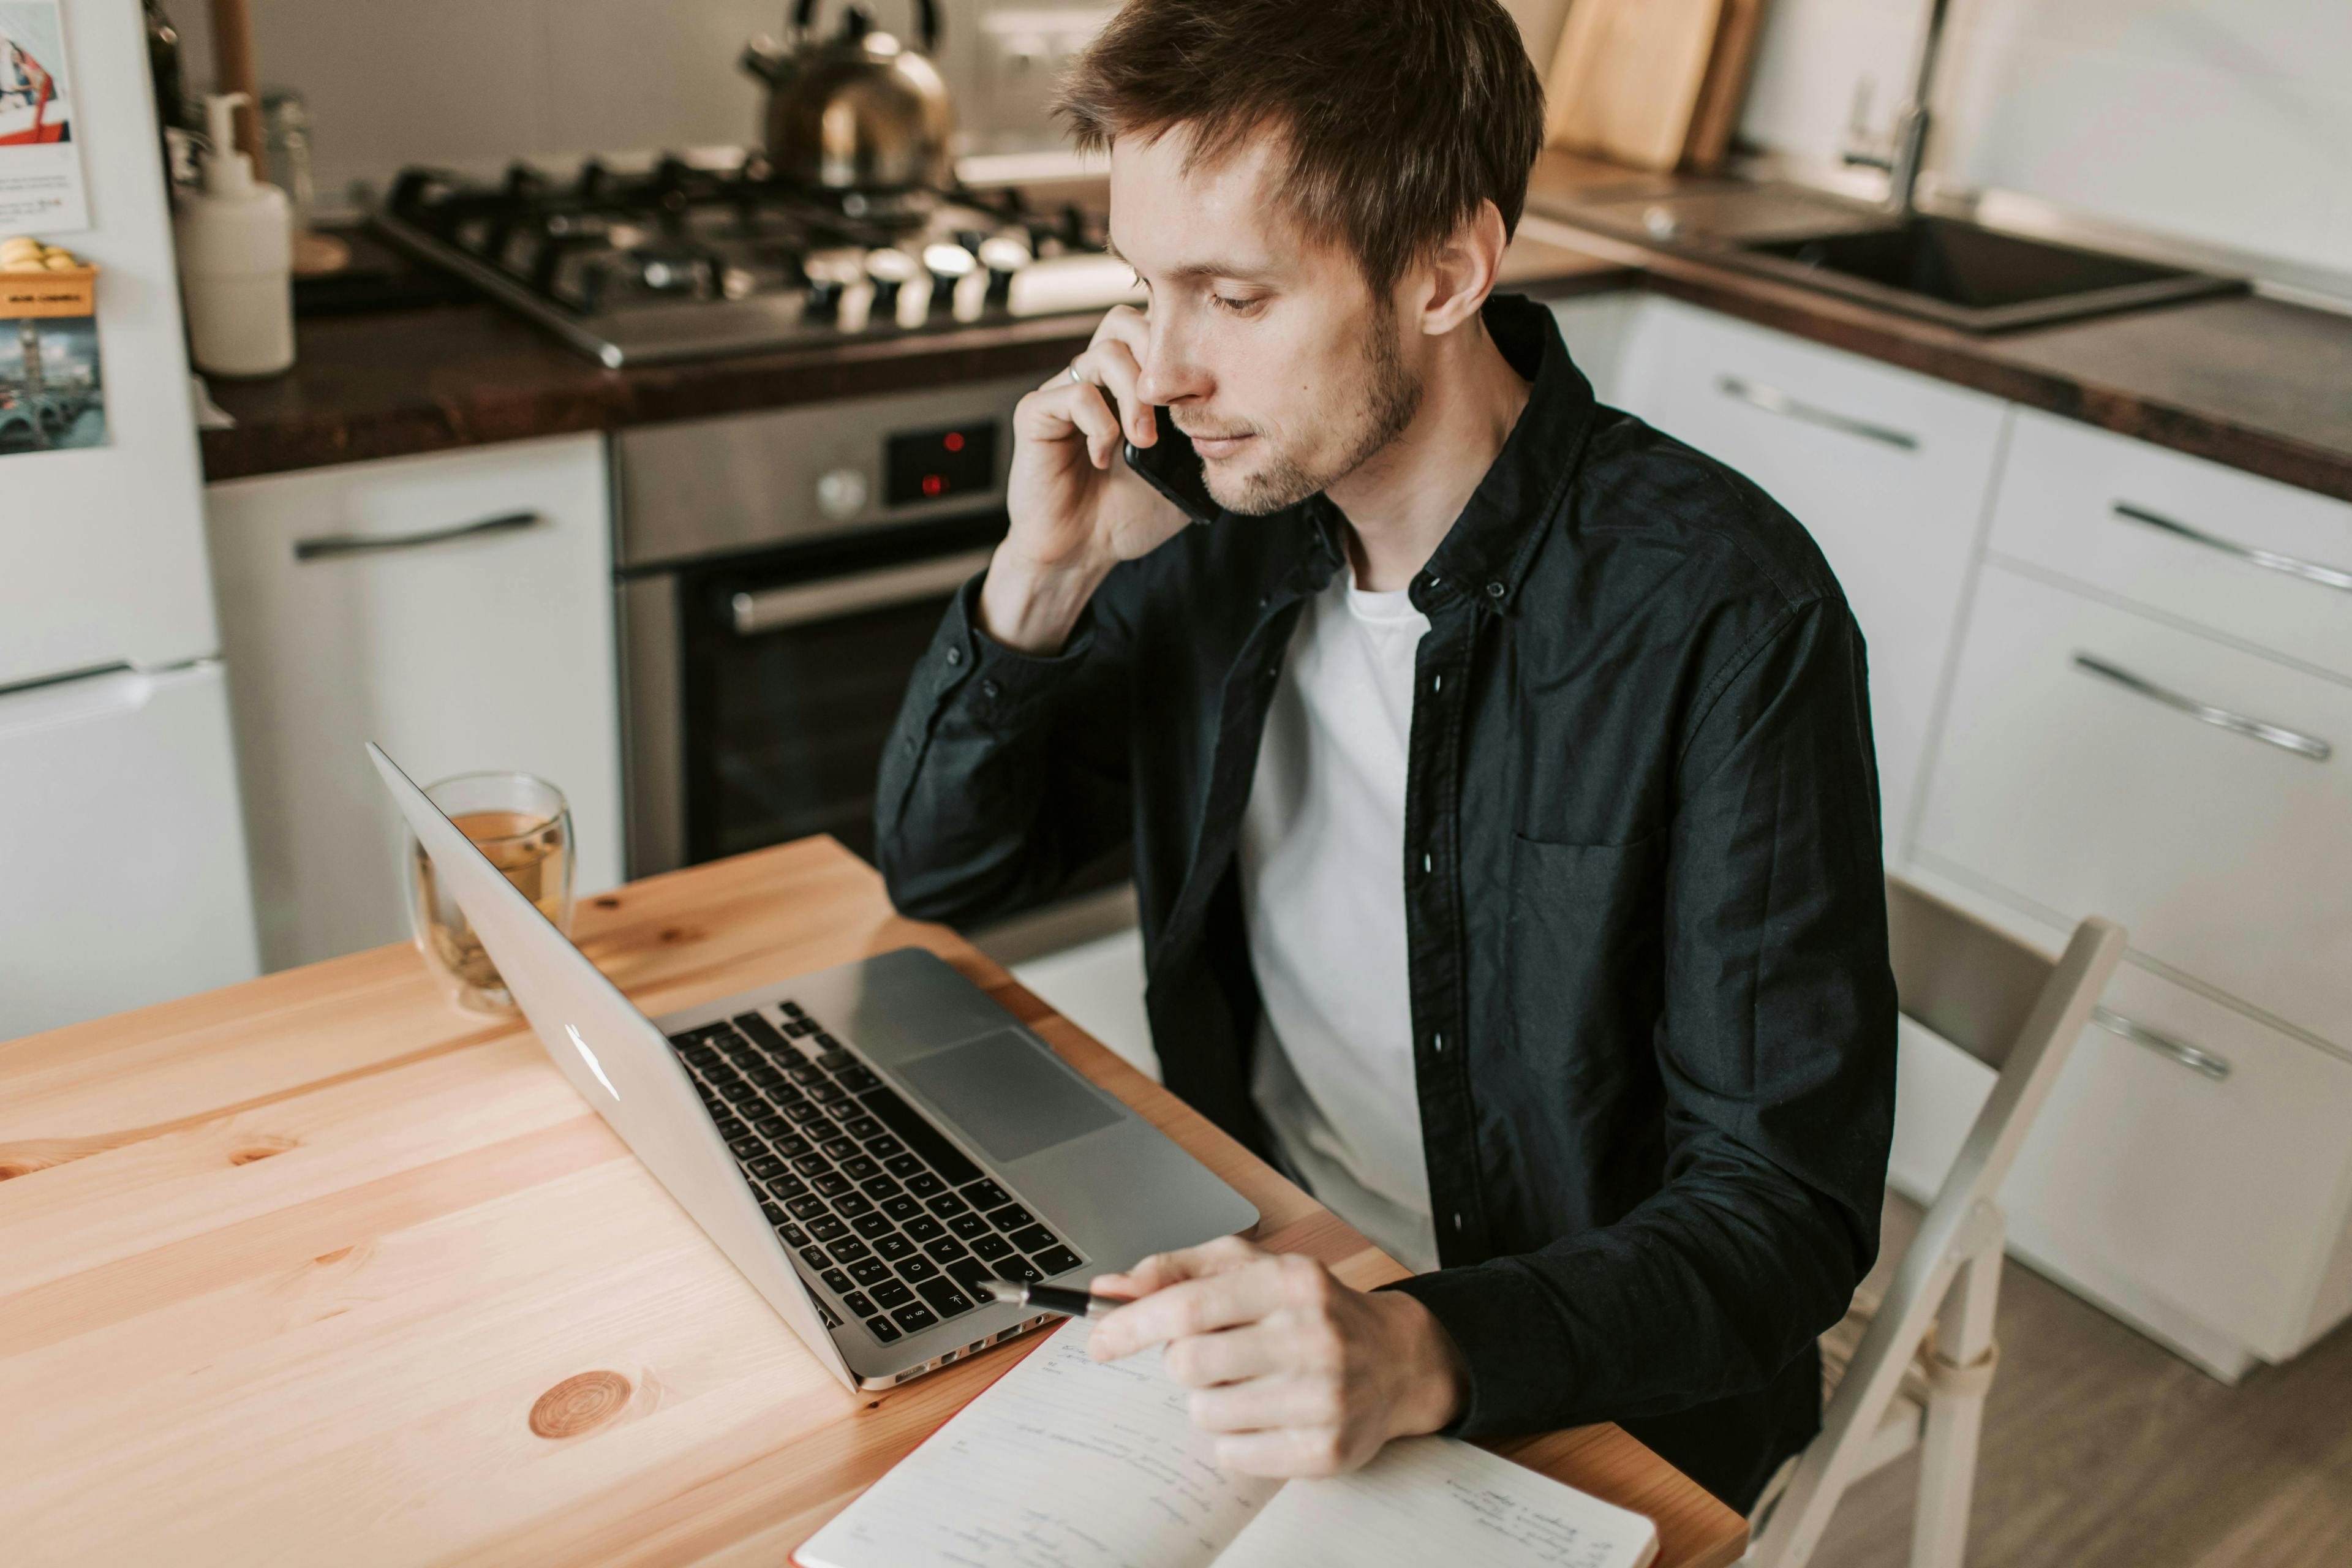 A man working from home, talking on the phone while taking notes, representing the flexibility and personalized approach offered by a marketing agency for startups.